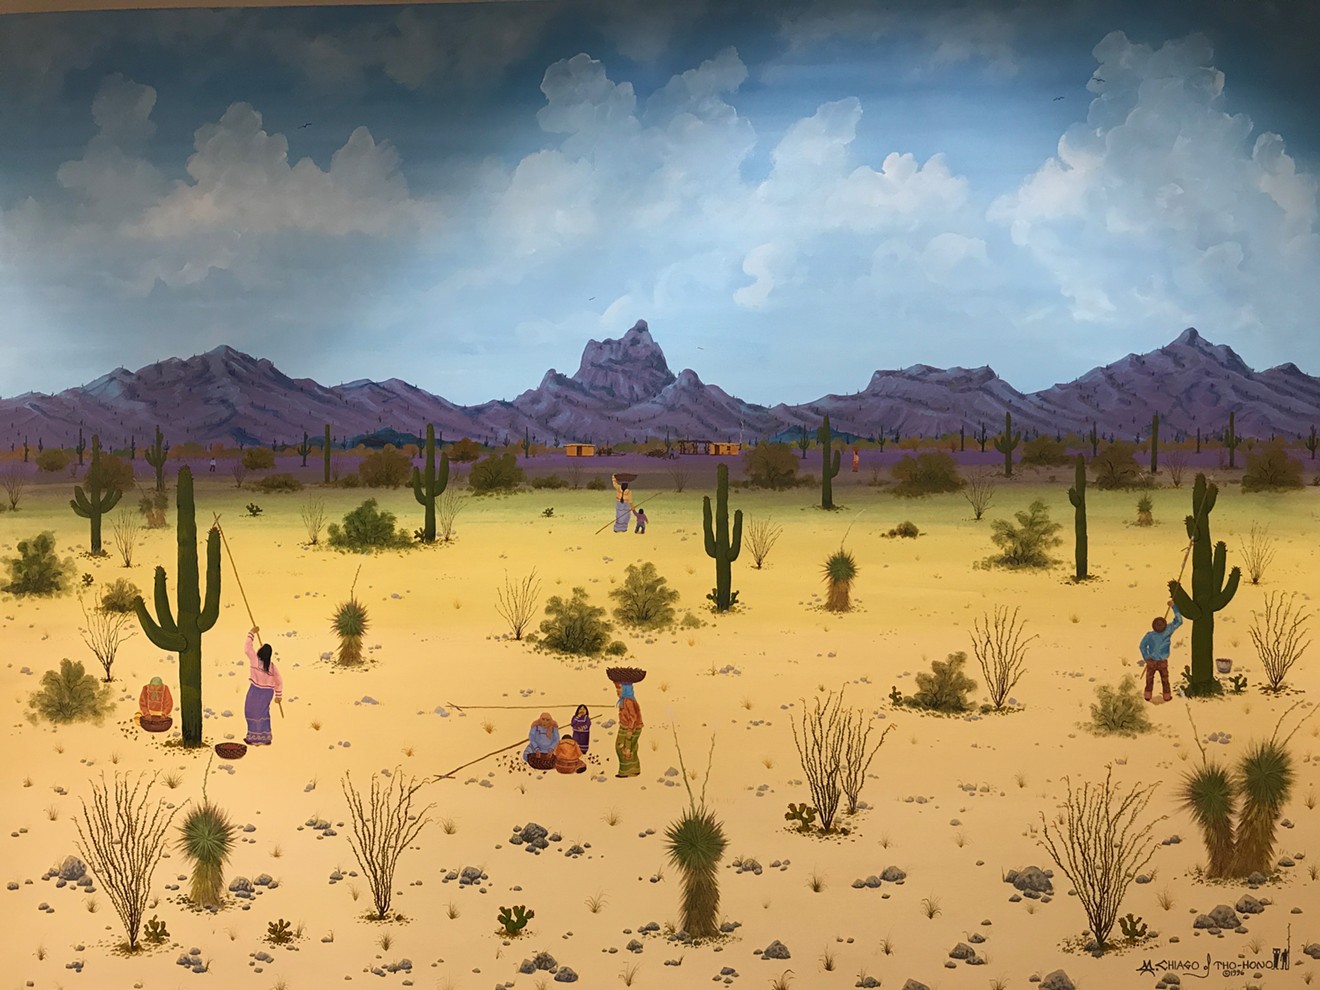 Painting by Michael Chiago on view at Phoenix City Hall.